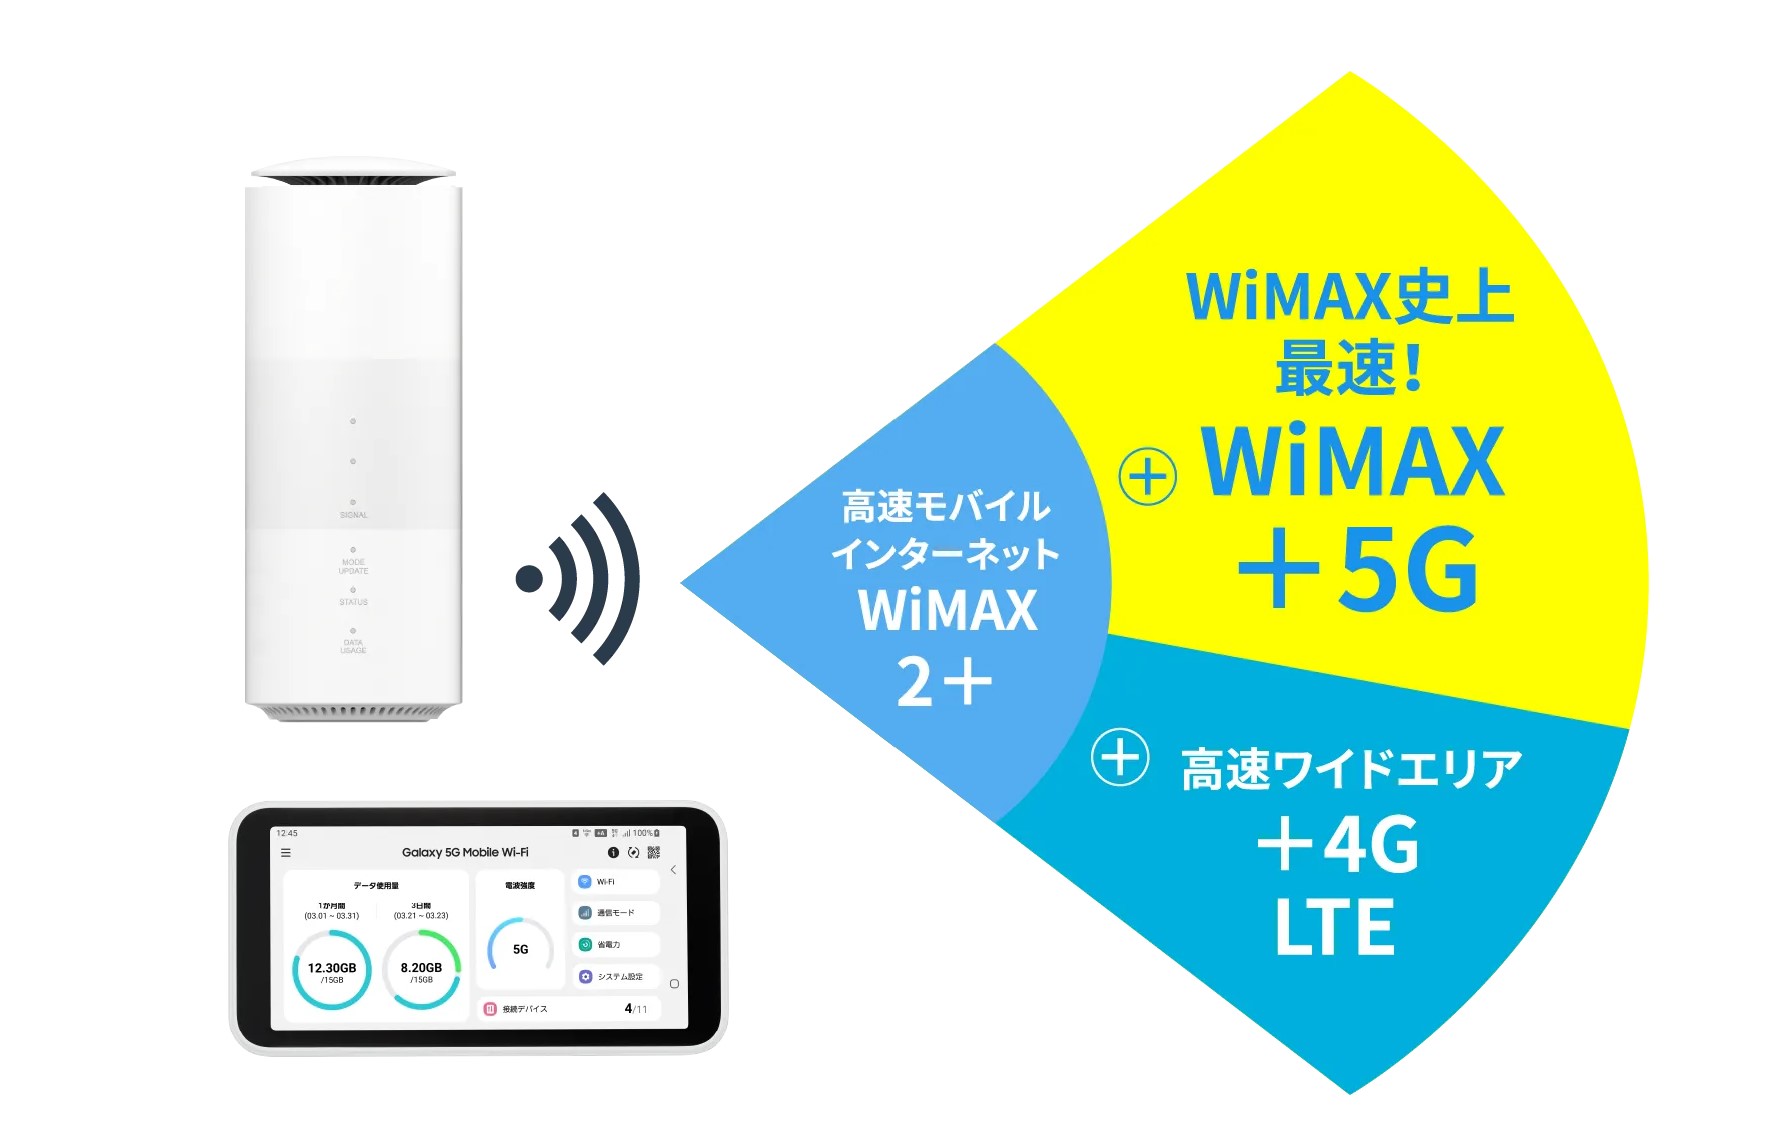 WIMAX6